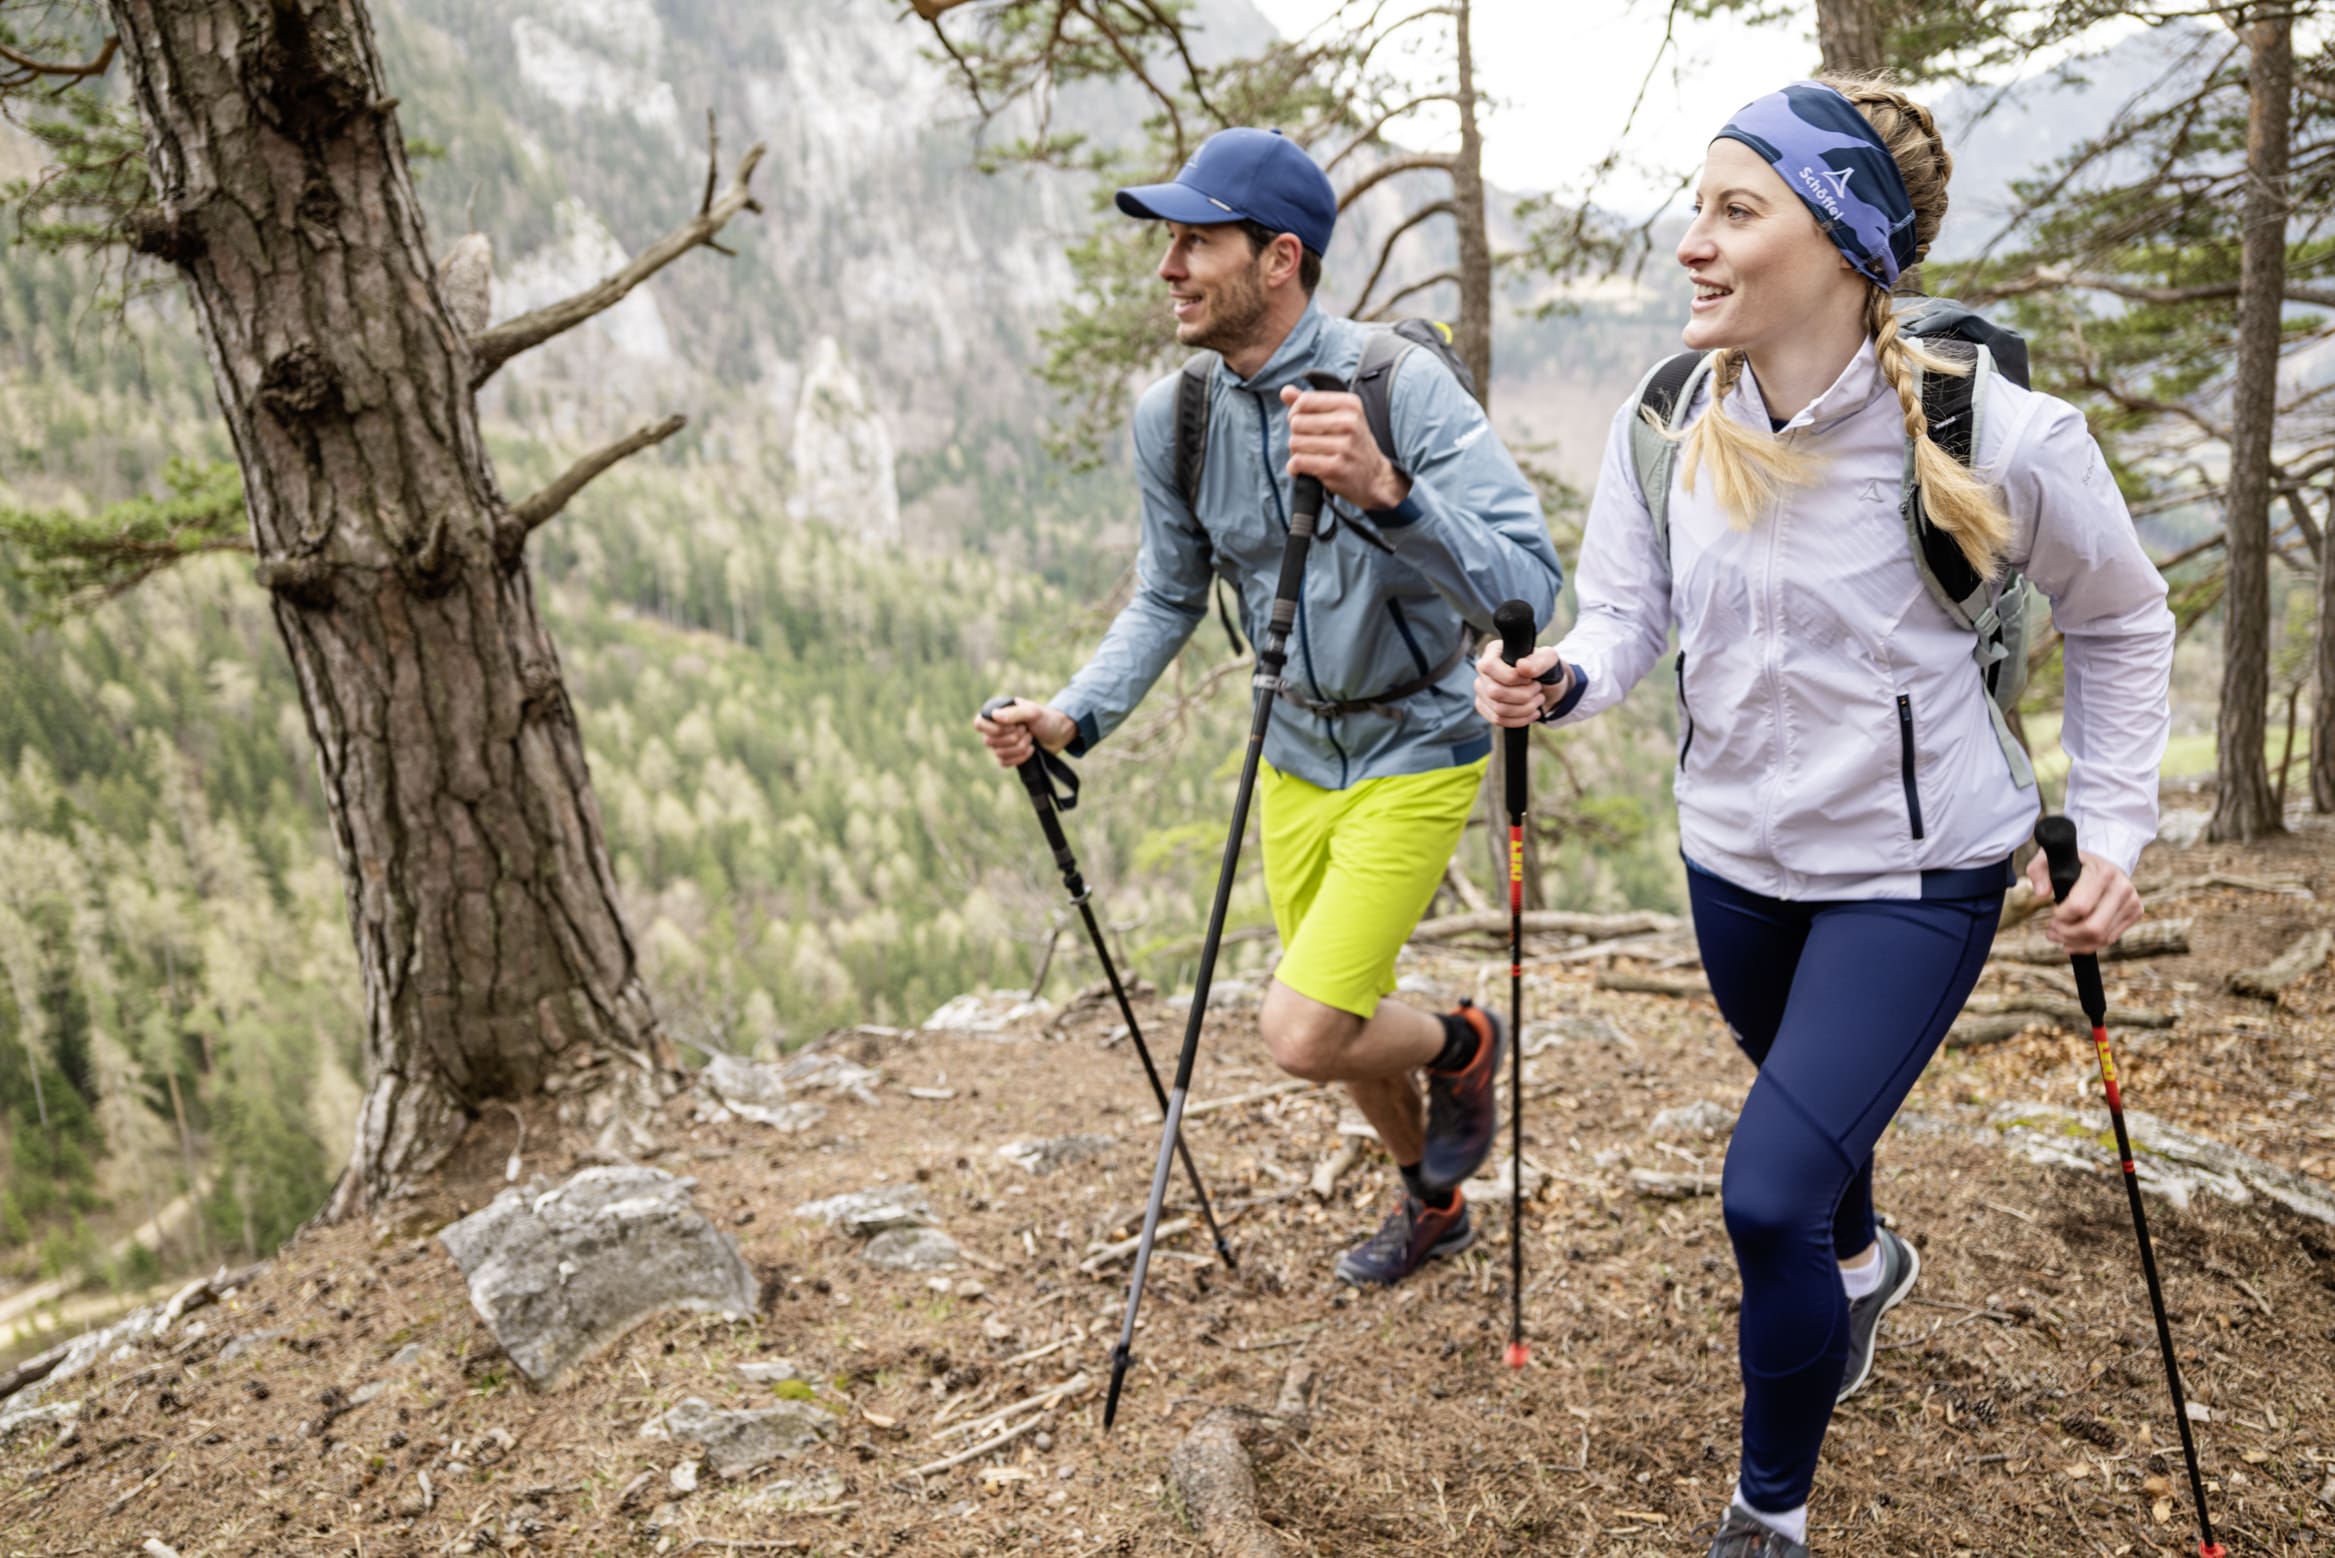 Schöffel Hiking Active: Cool Hiking Clothing for Adventure Seekers